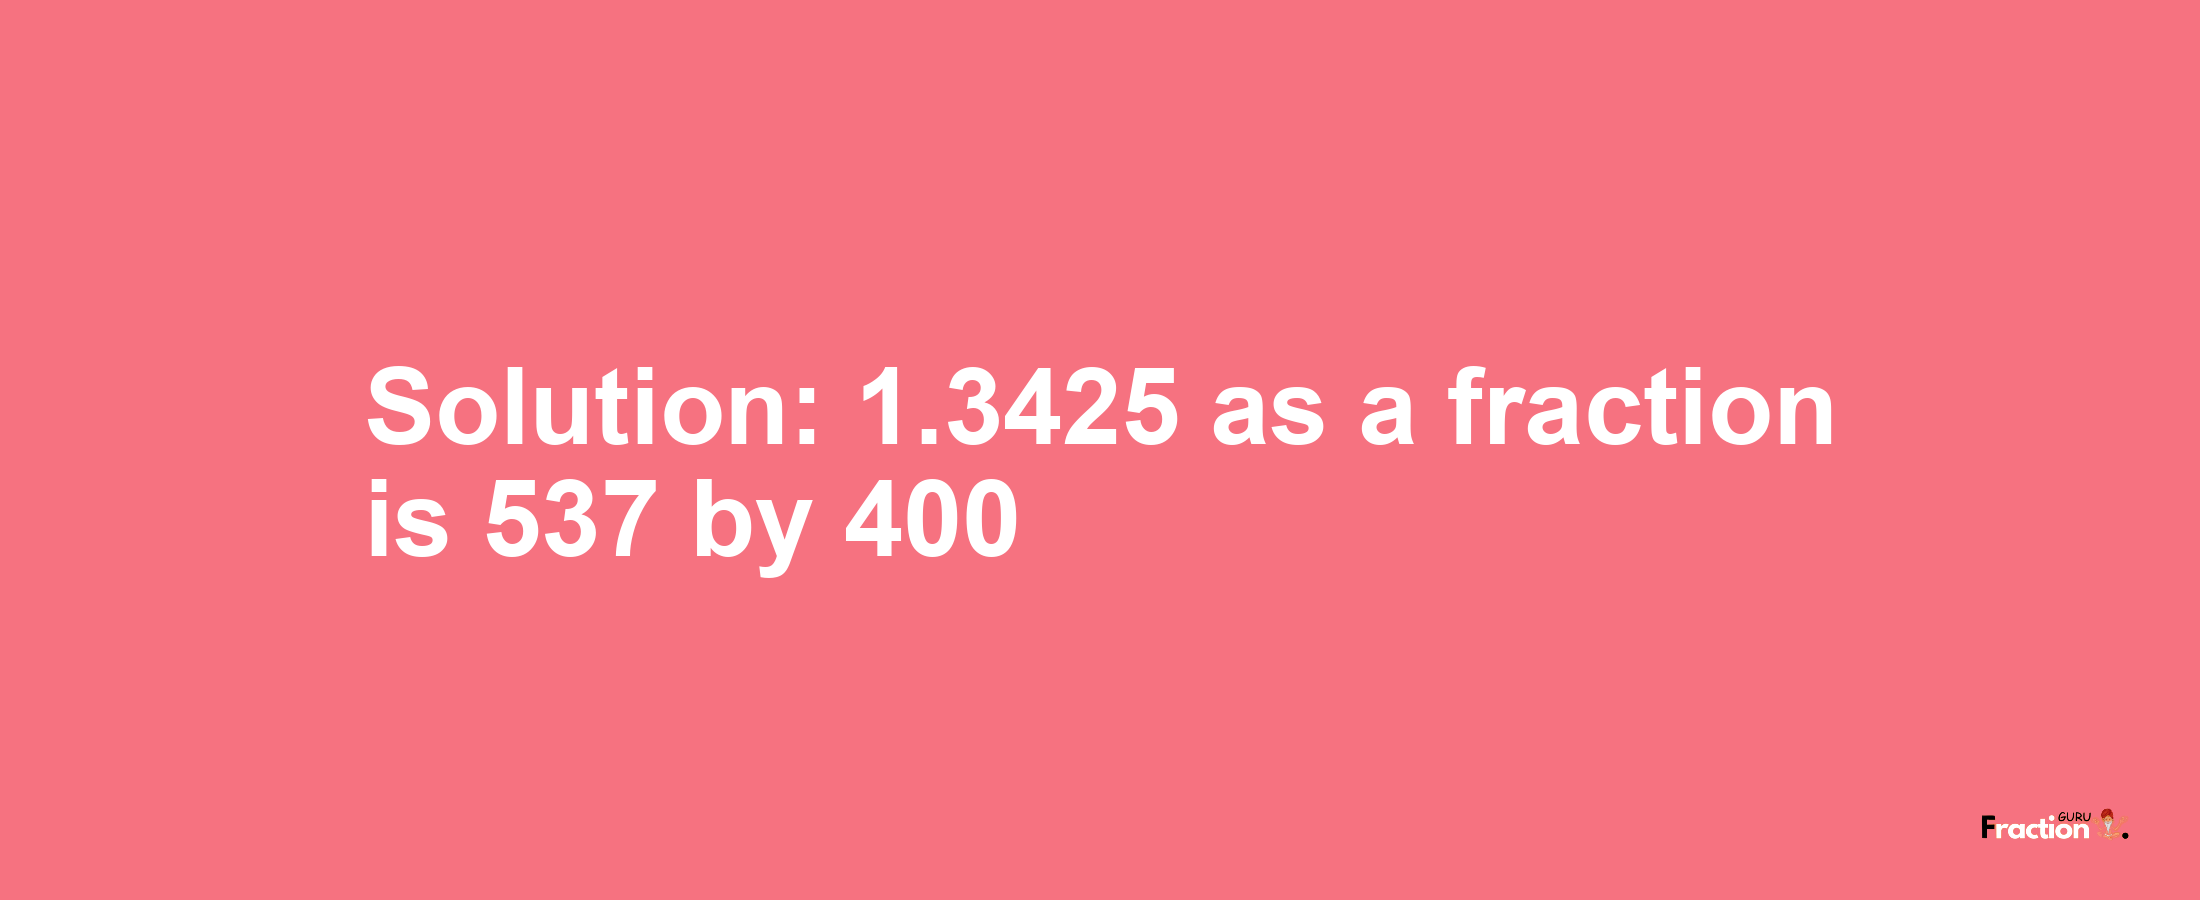 Solution:1.3425 as a fraction is 537/400